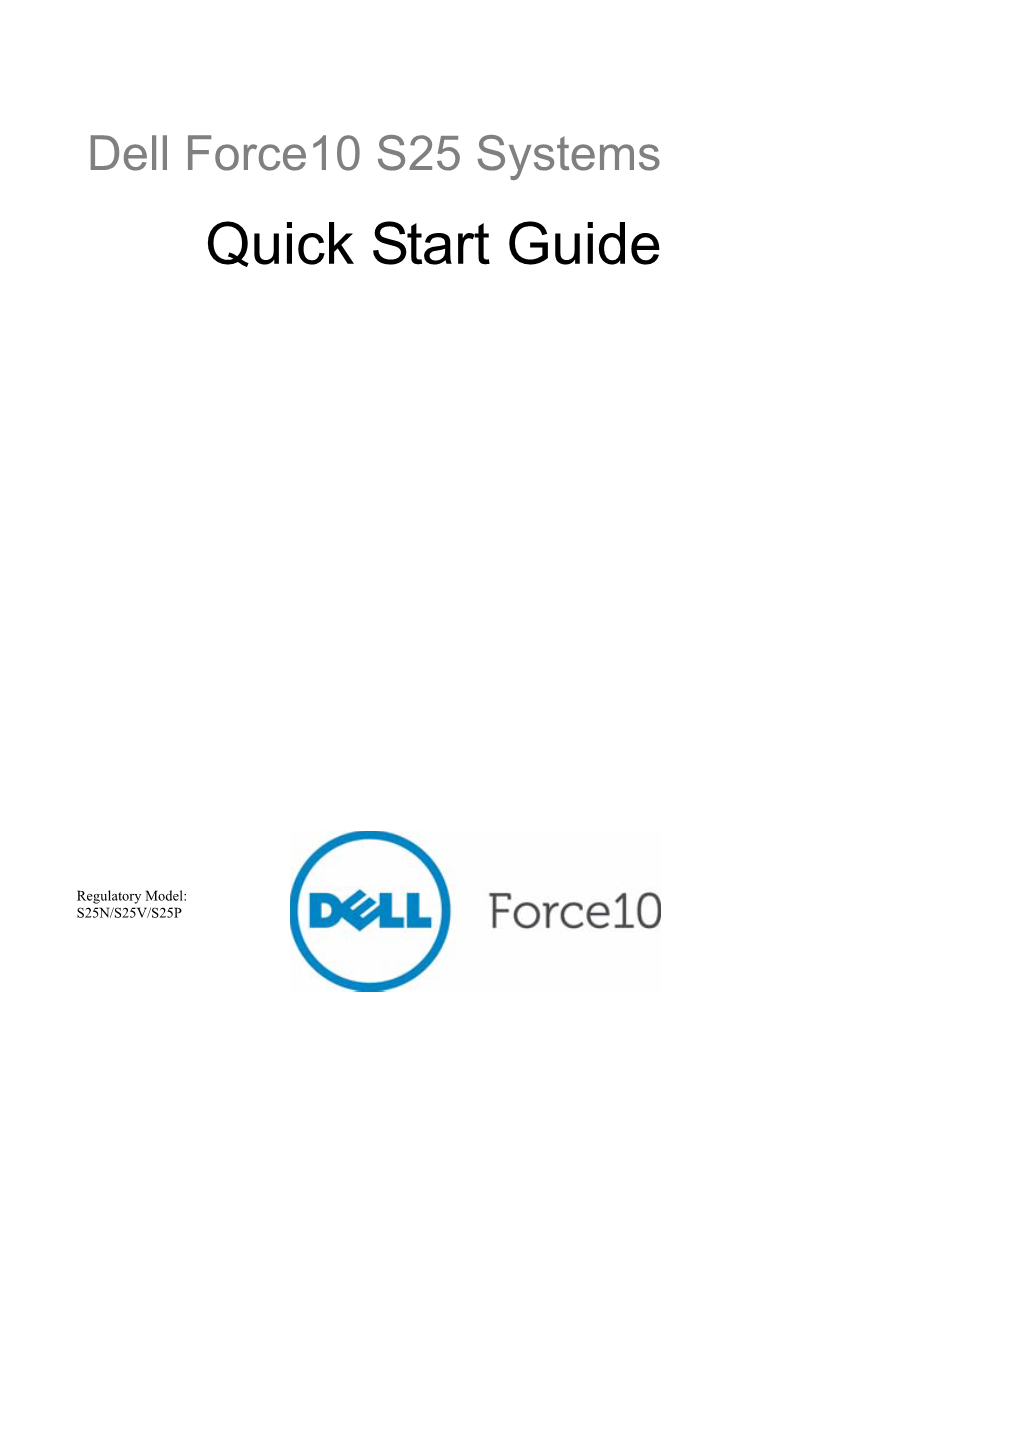 Dell Force10 S25 Systems Quick Start Guide